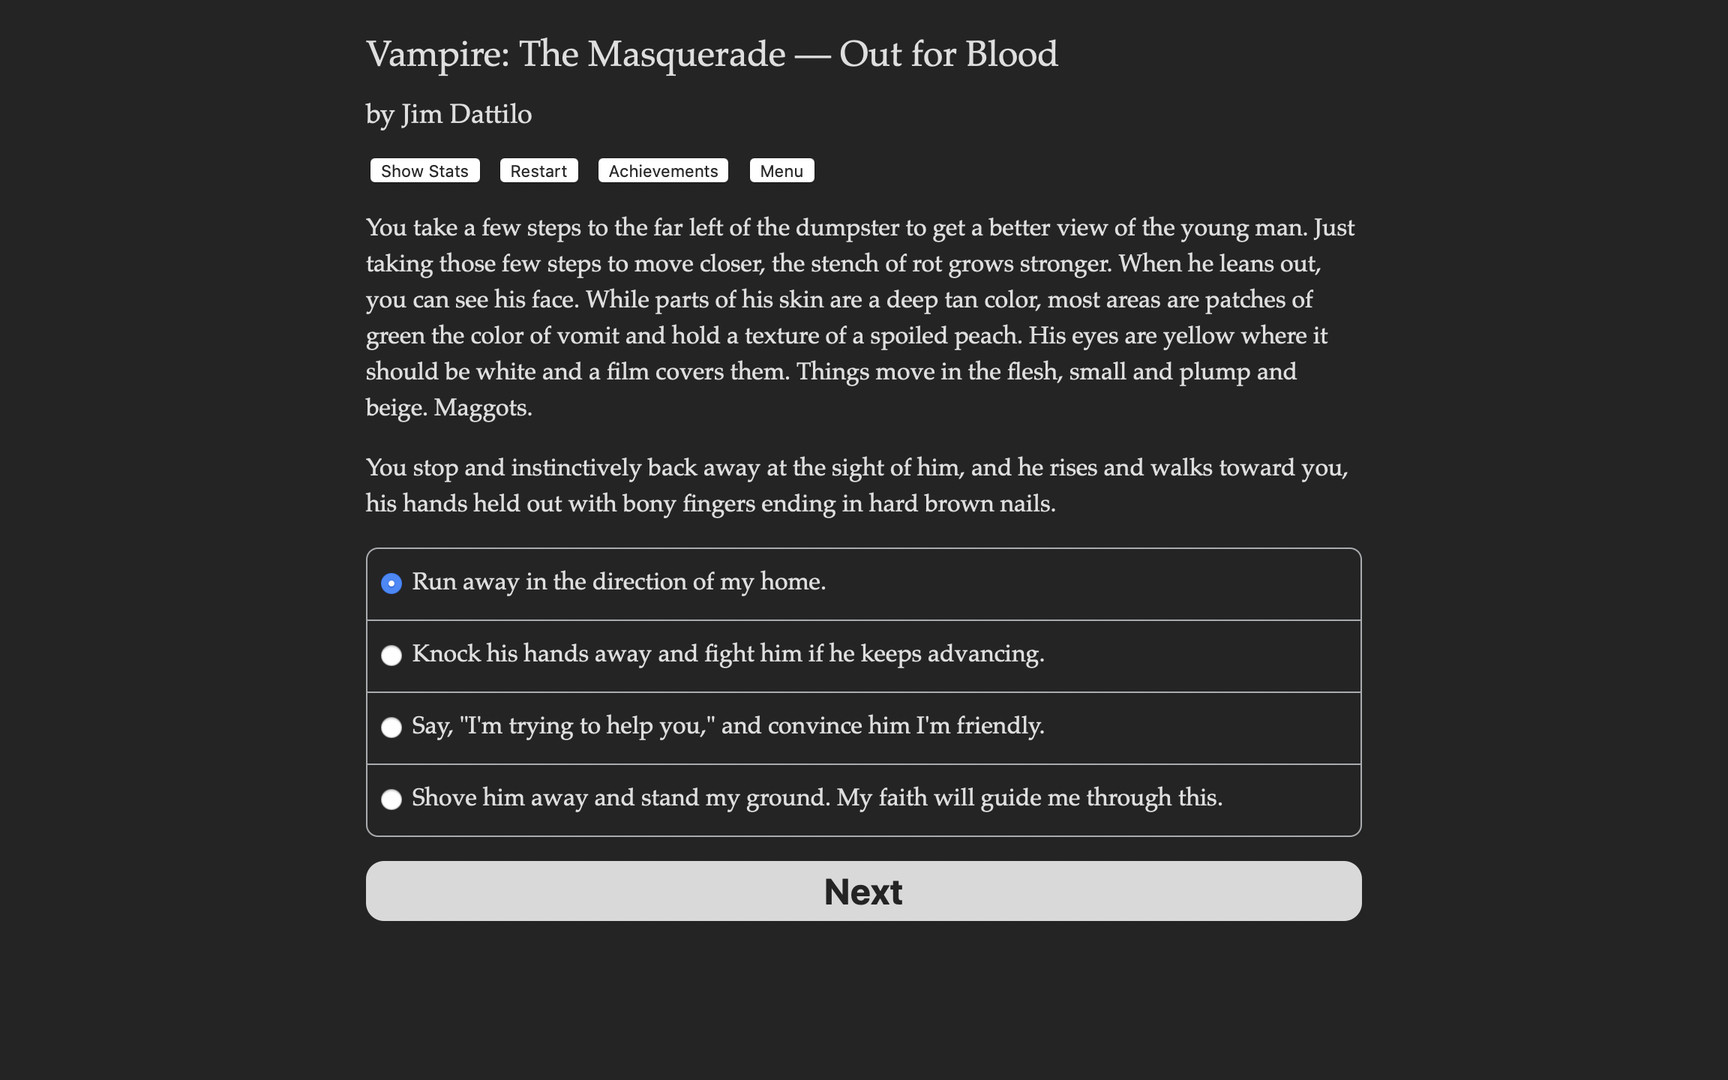 Vampire: The Masquerade - Out For Blood Steam CD Key